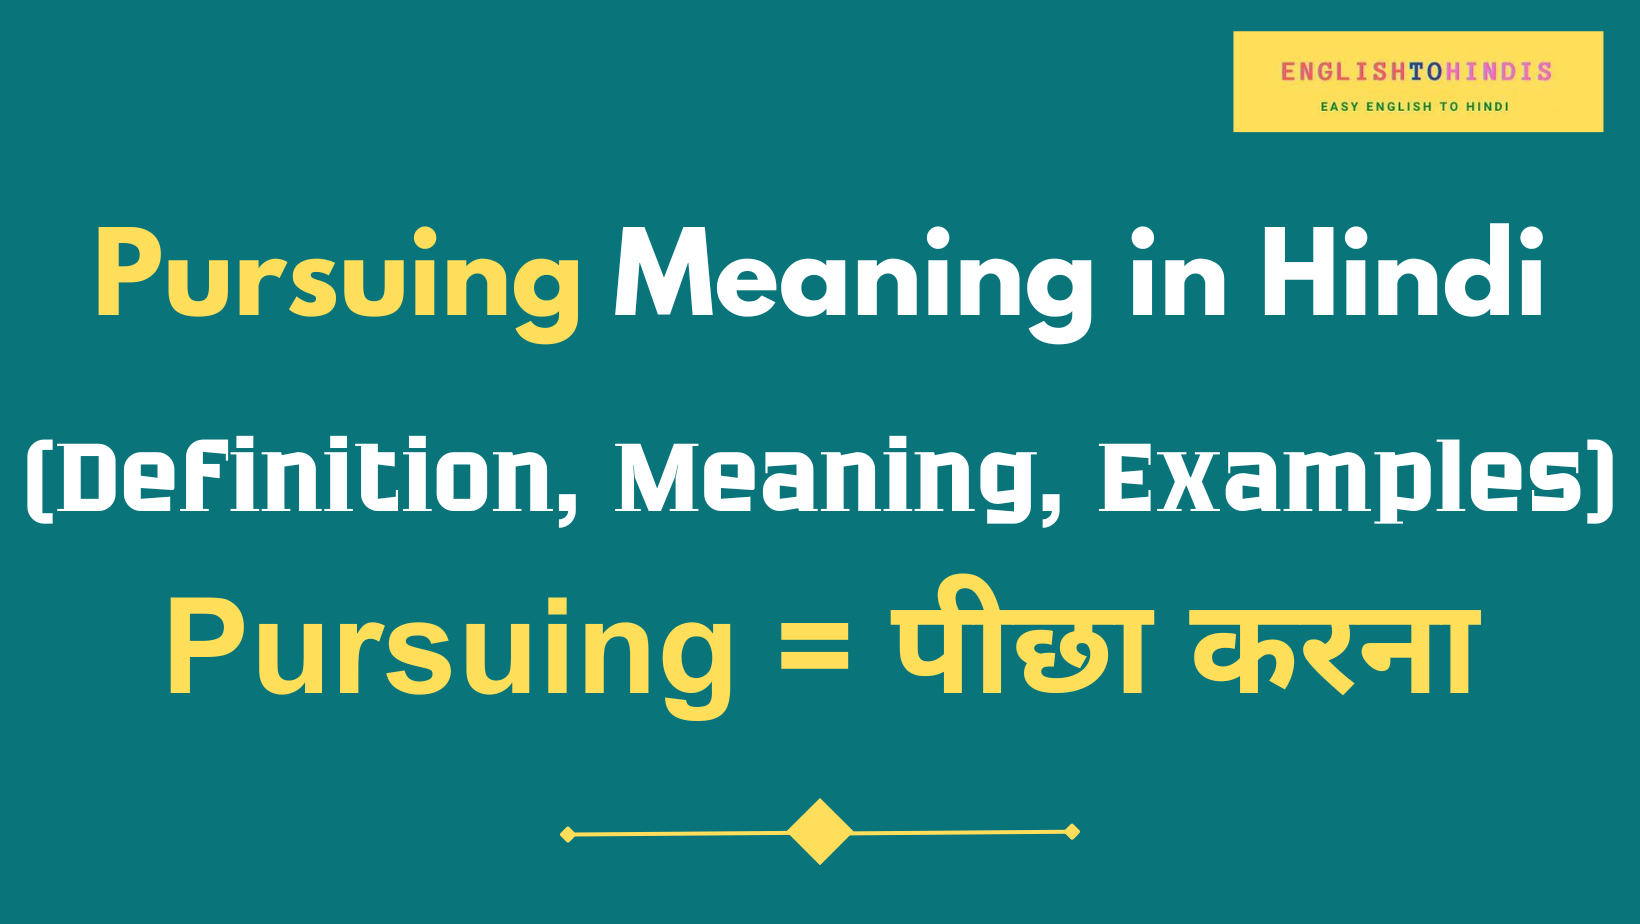 Pursuing Meaning in Hindi